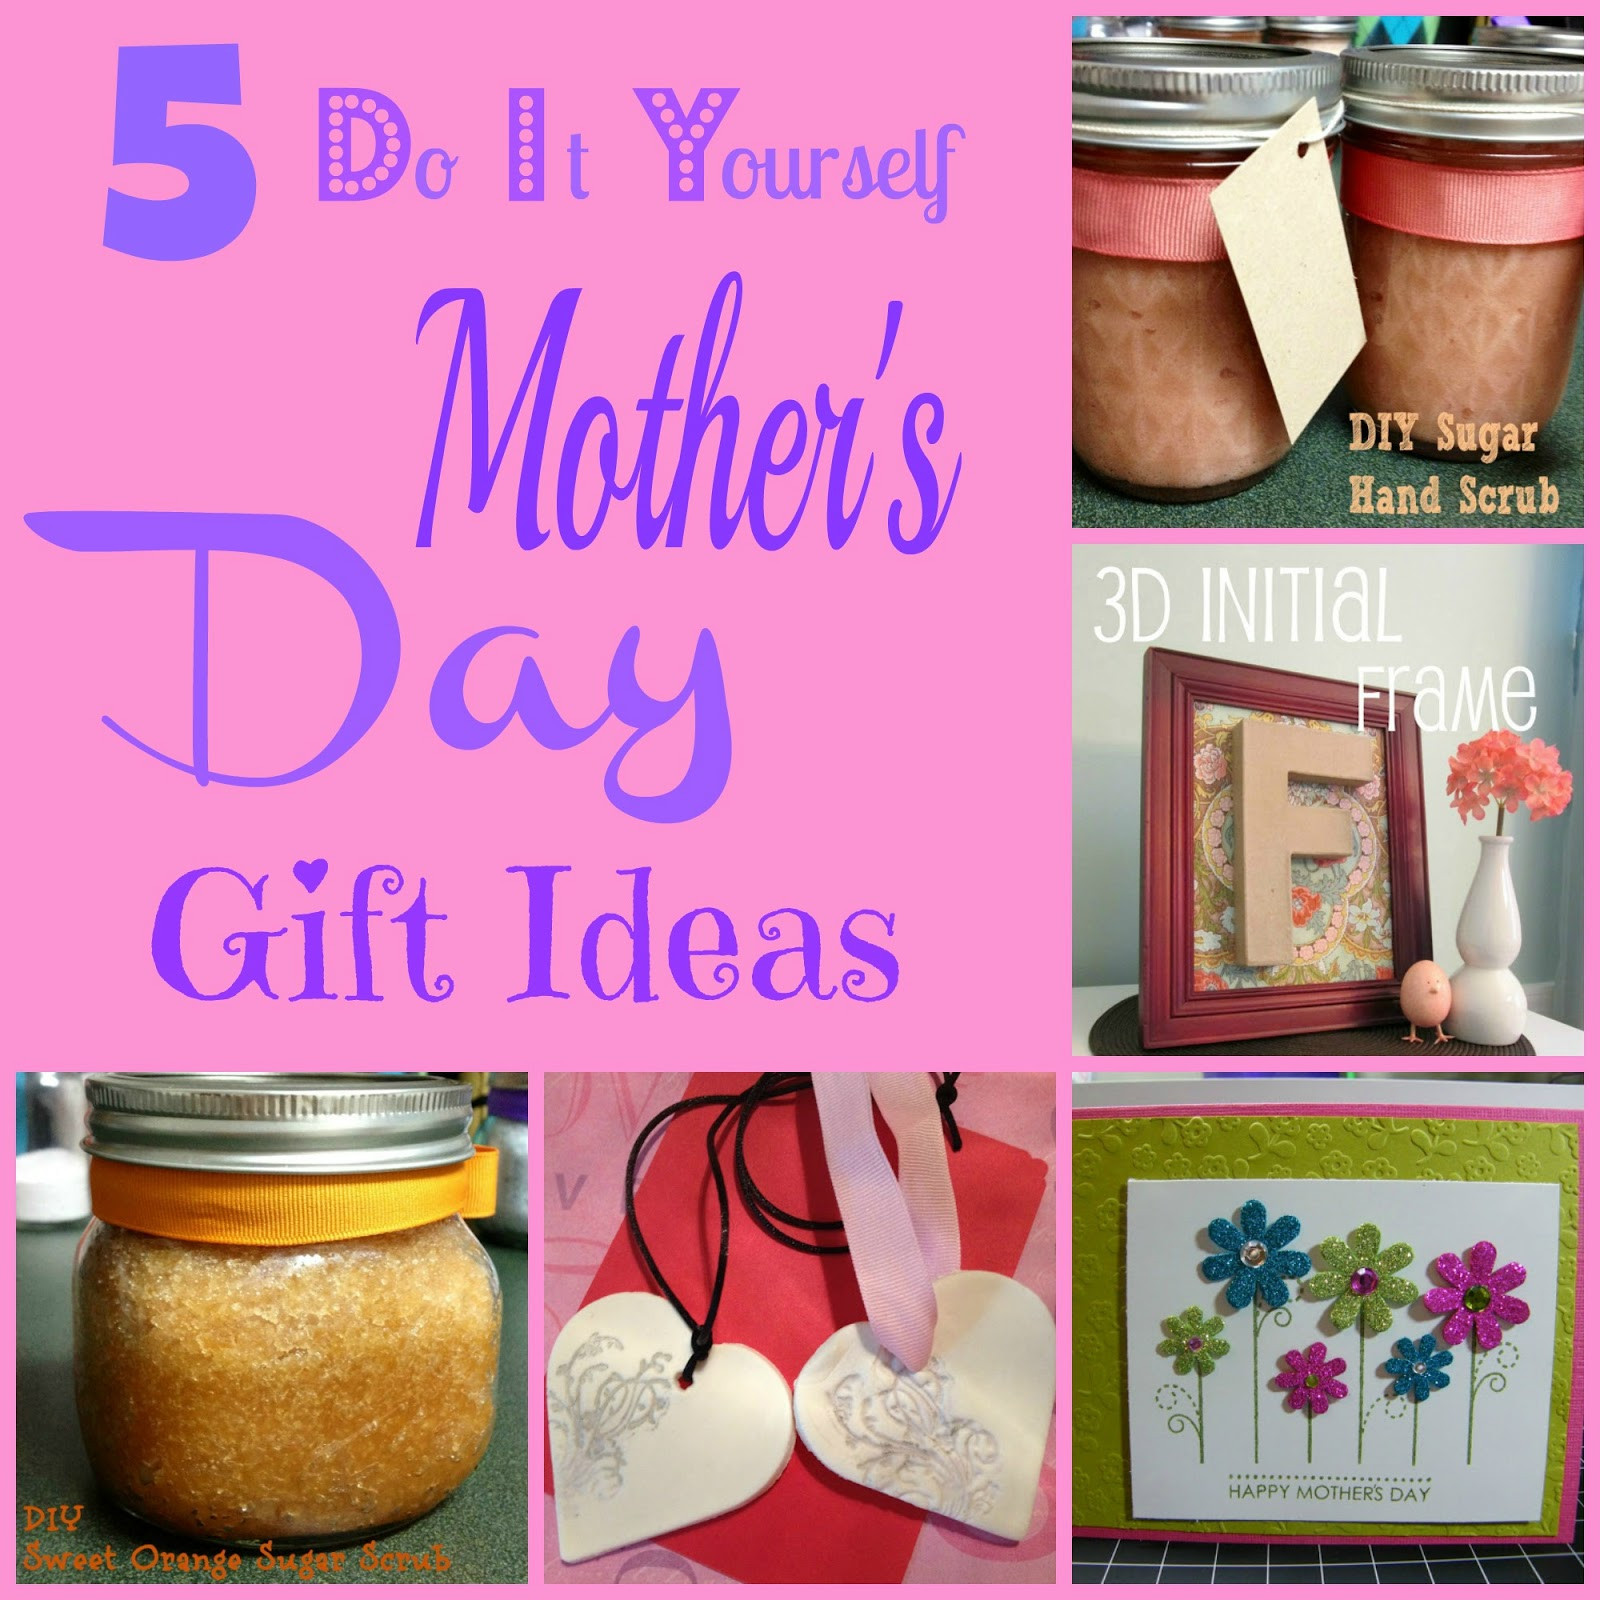 Best ideas about Mother Day Gift Ideas Diy
. Save or Pin 5 DIY Mother s Day Gift Ideas Outnumbered 3 to 1 Now.